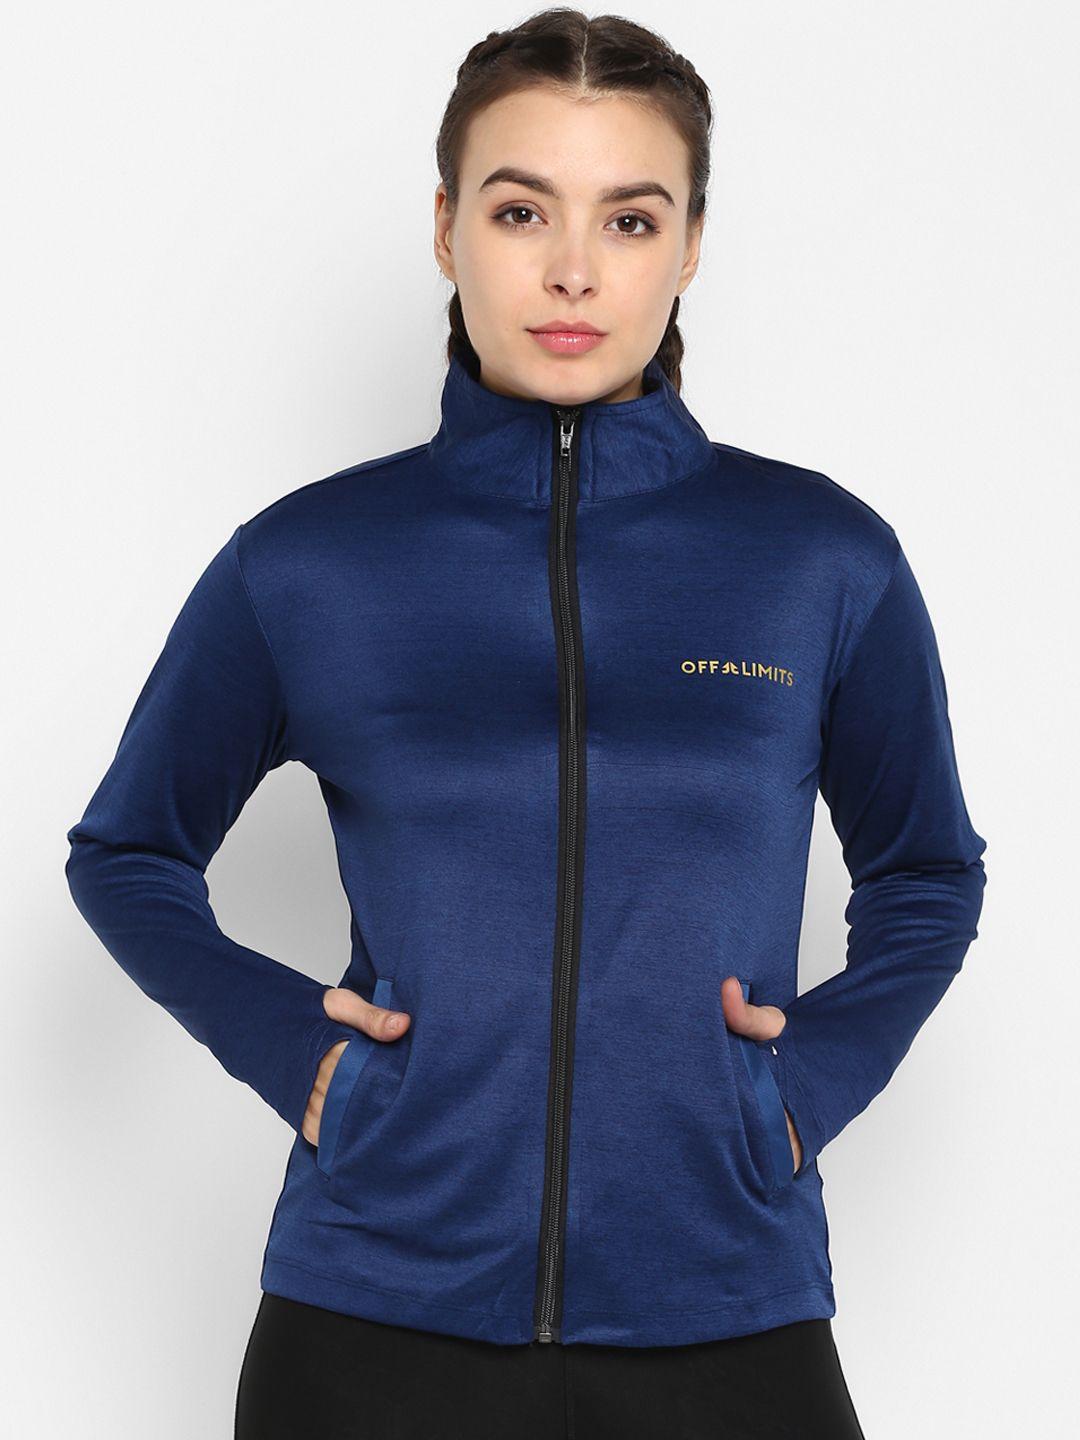 off limits women navy blue solid sporty jacket